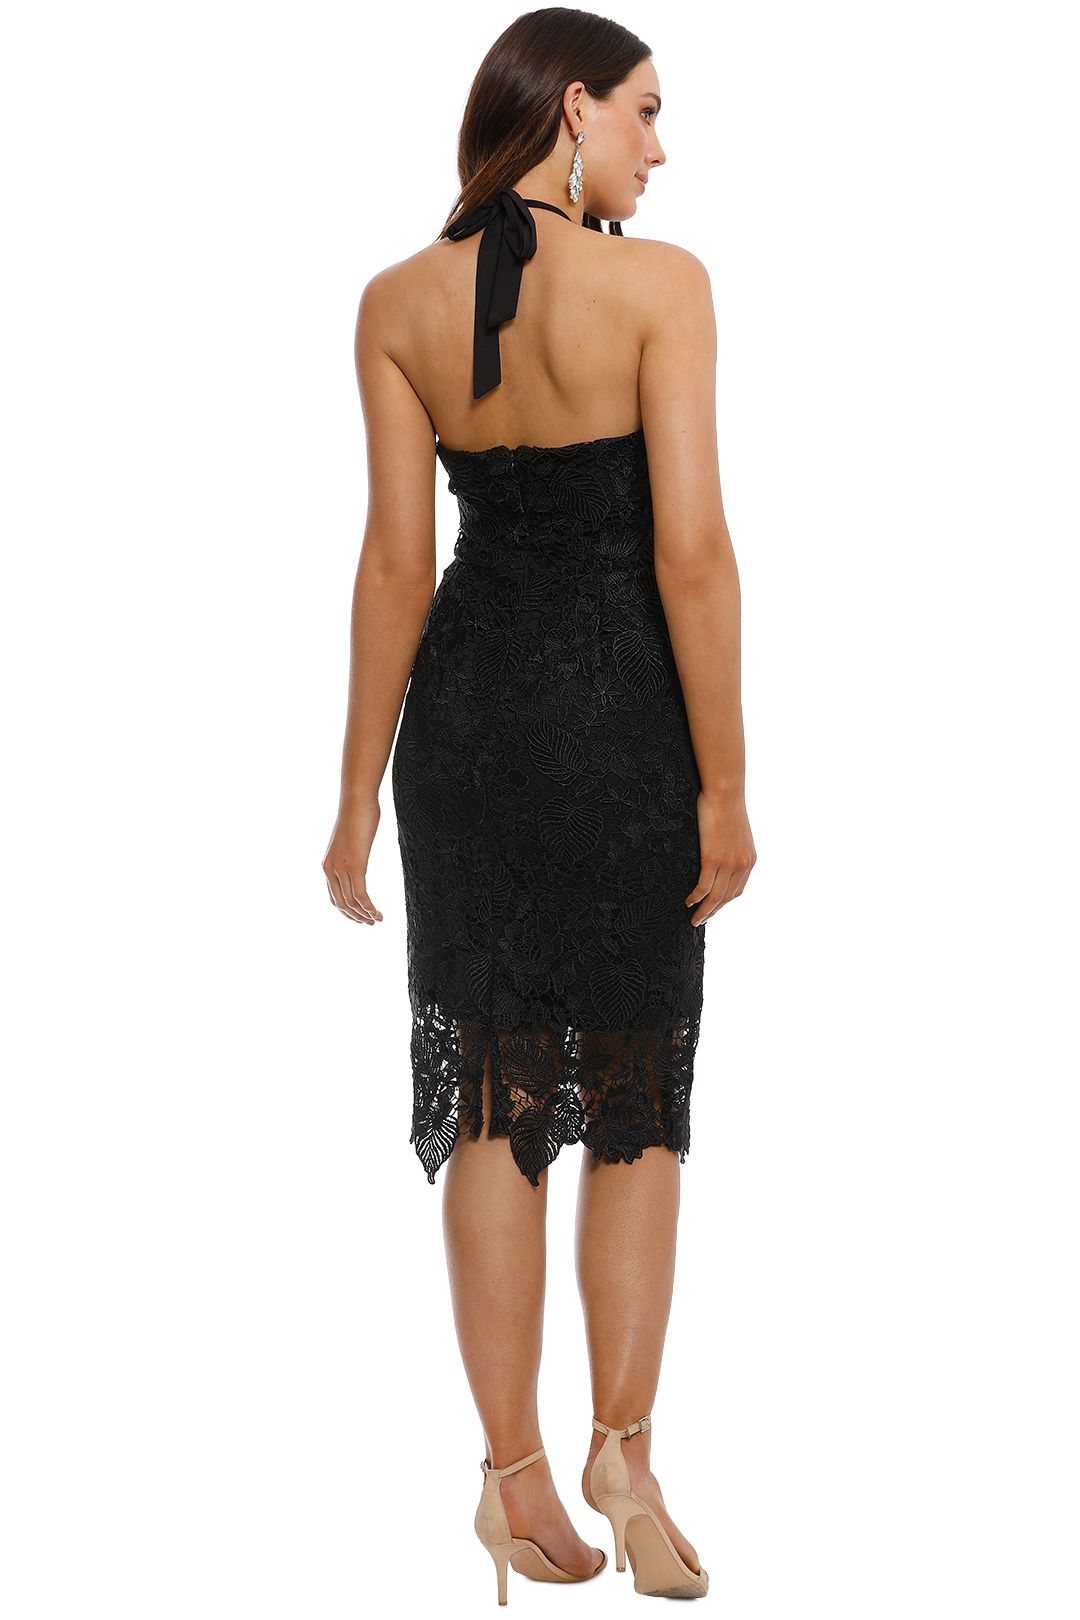 Logan Cocktail Dress in Black by Langhem for Hire